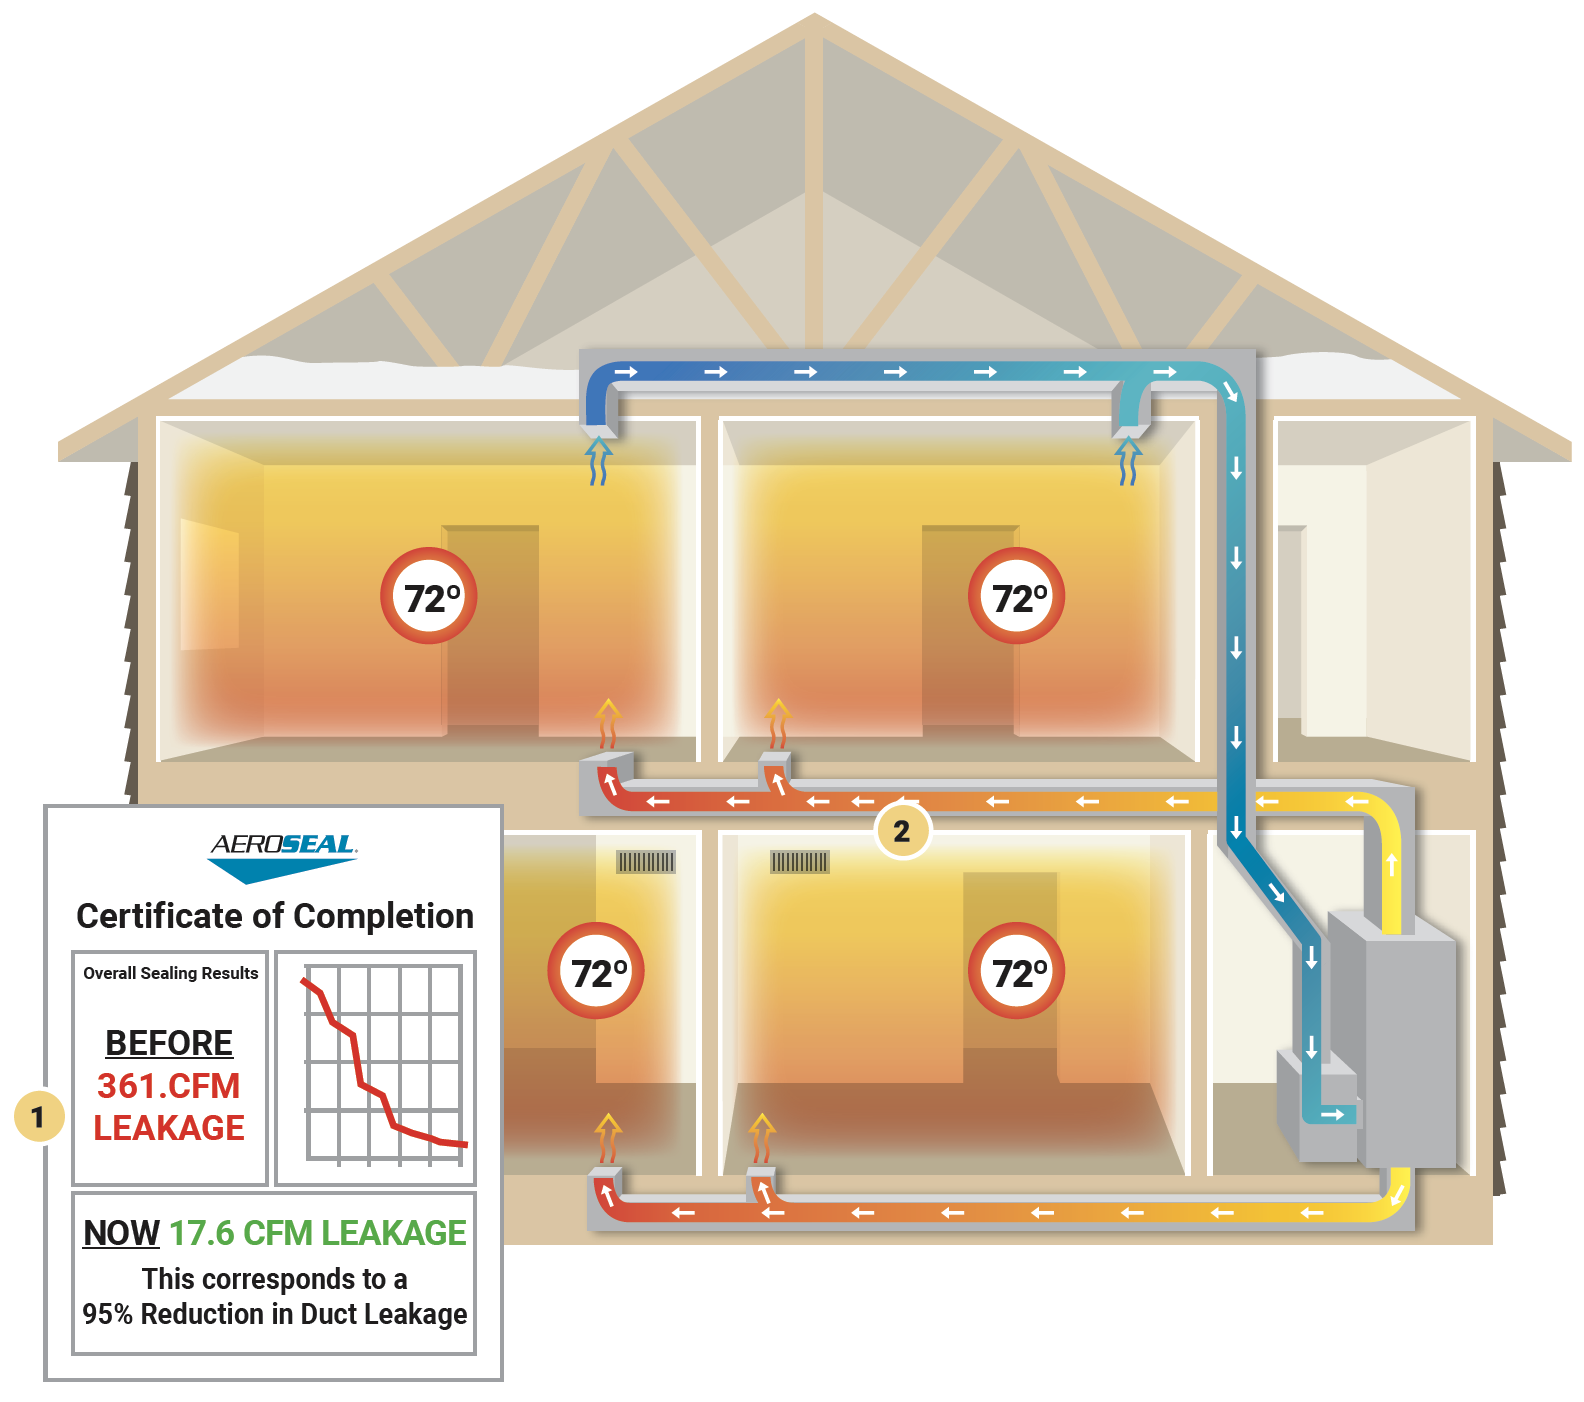 A diagram of a house's heating system, illustrating the various components and their connections.